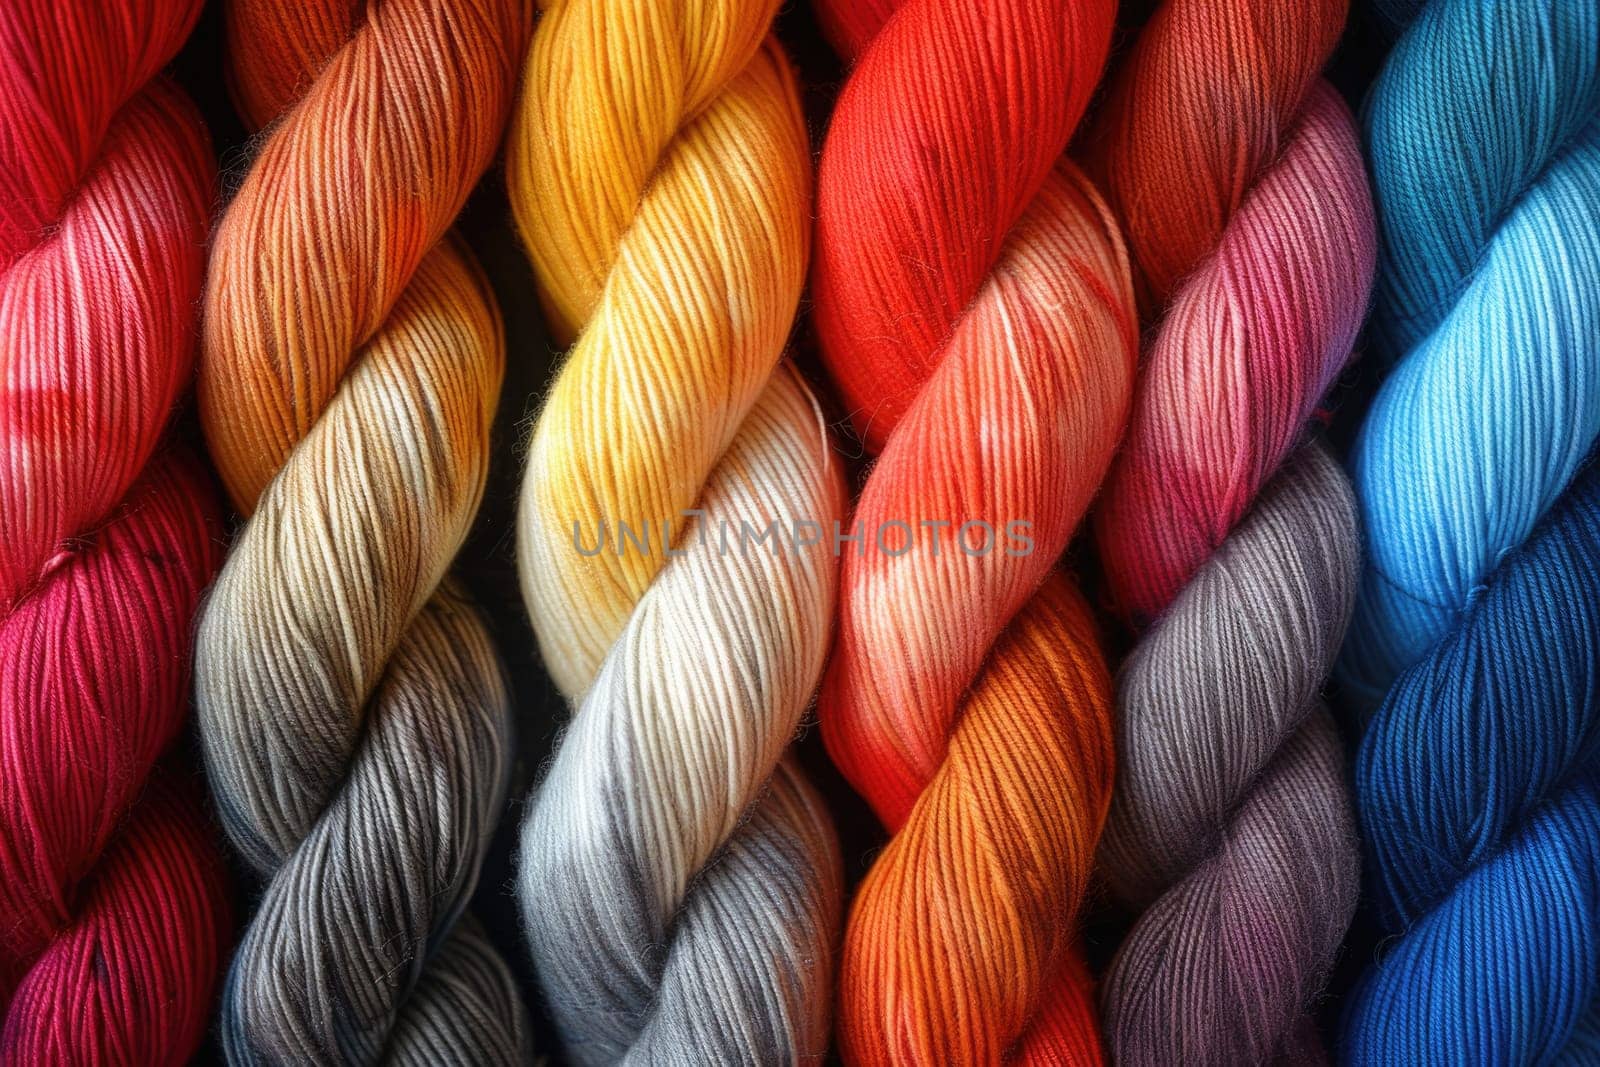 Close up of a spectrum of yarn skeins arranged neatly.